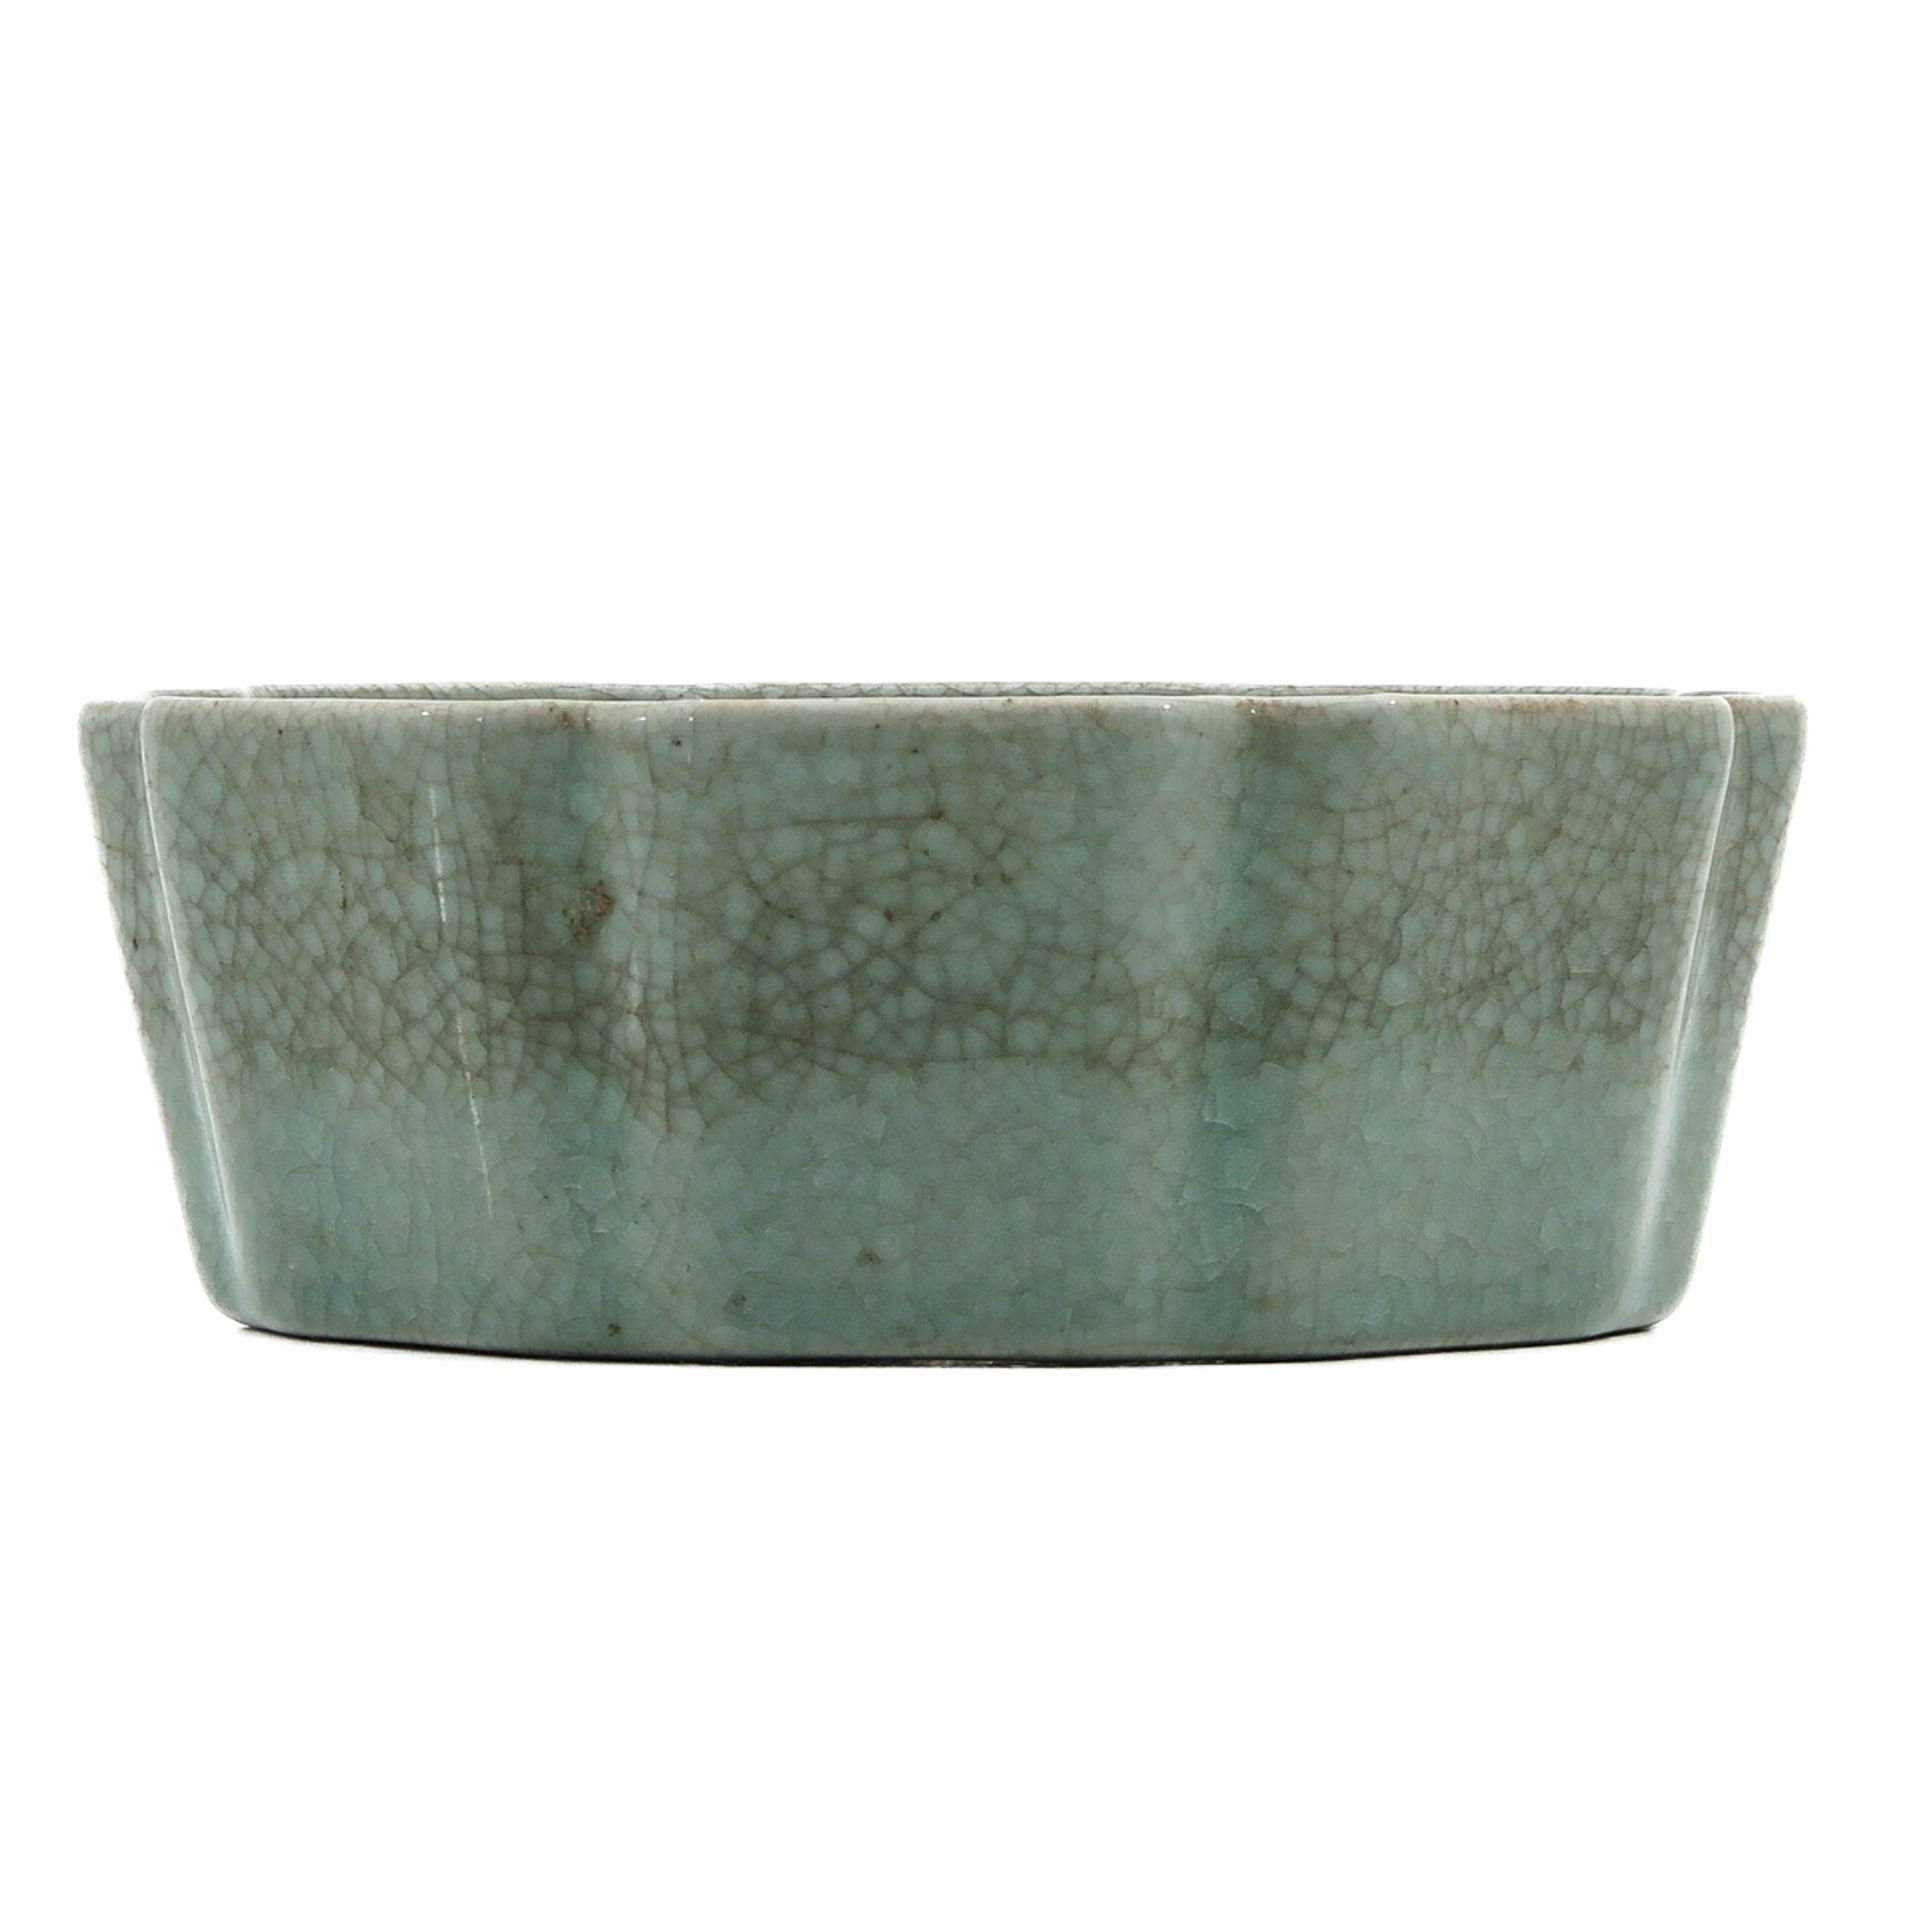 A Collection of Celadon - Image 4 of 10